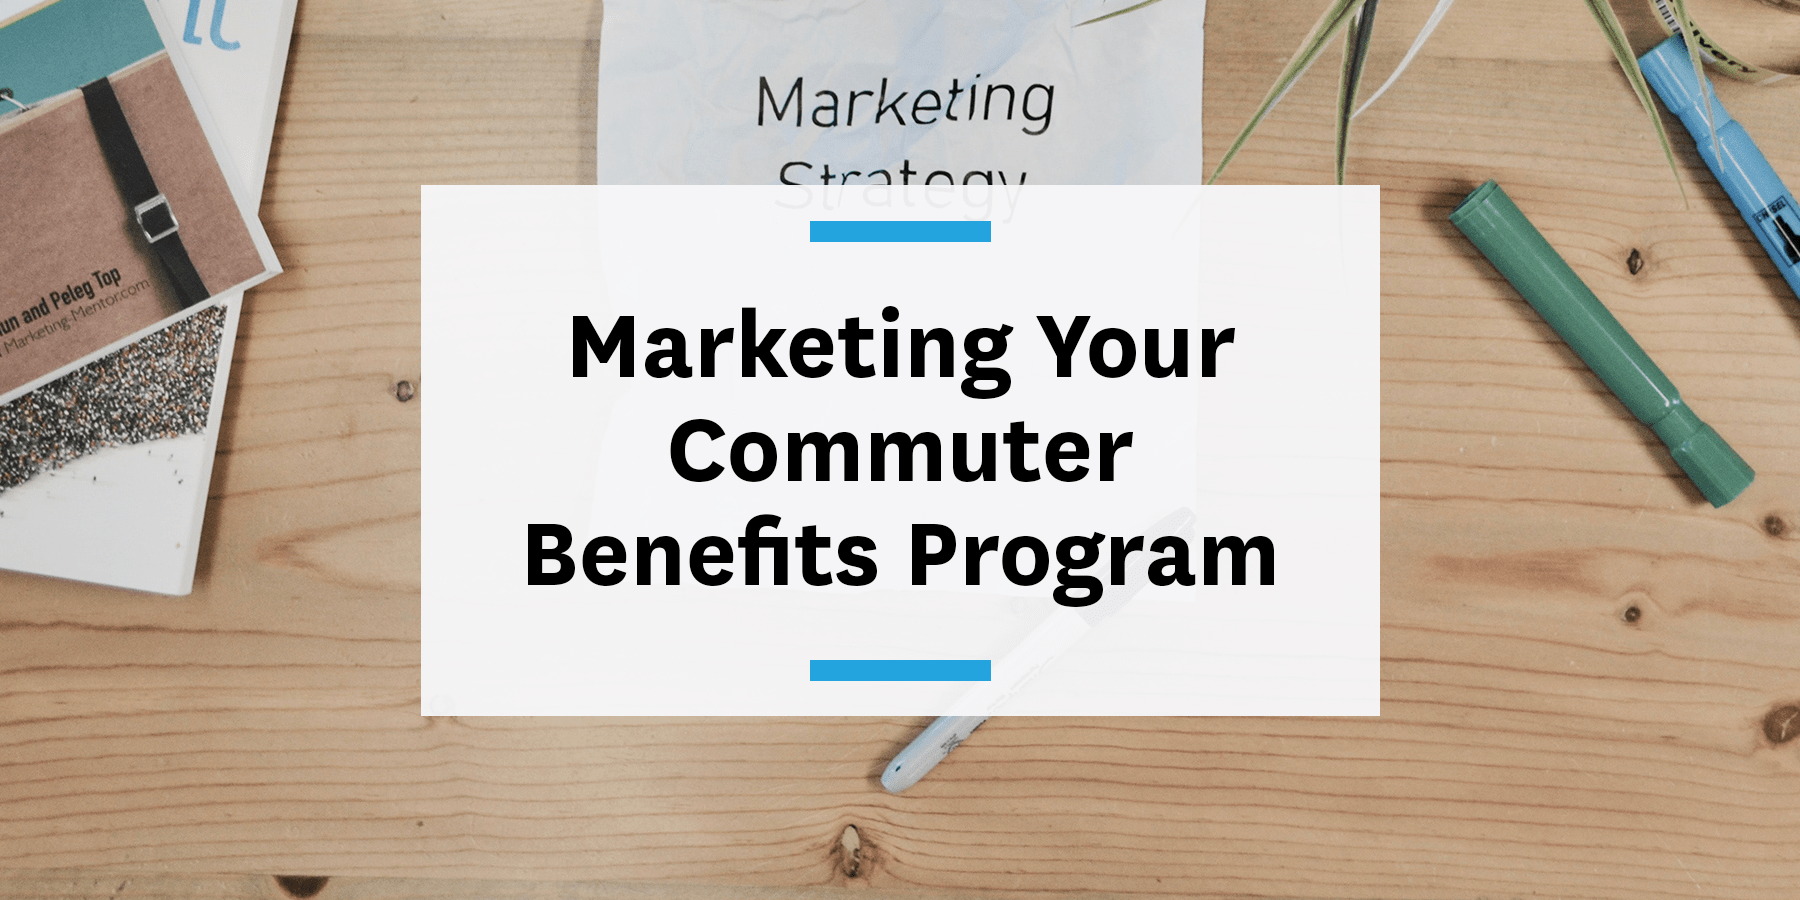 Feature image for effectively marketing your commuter program